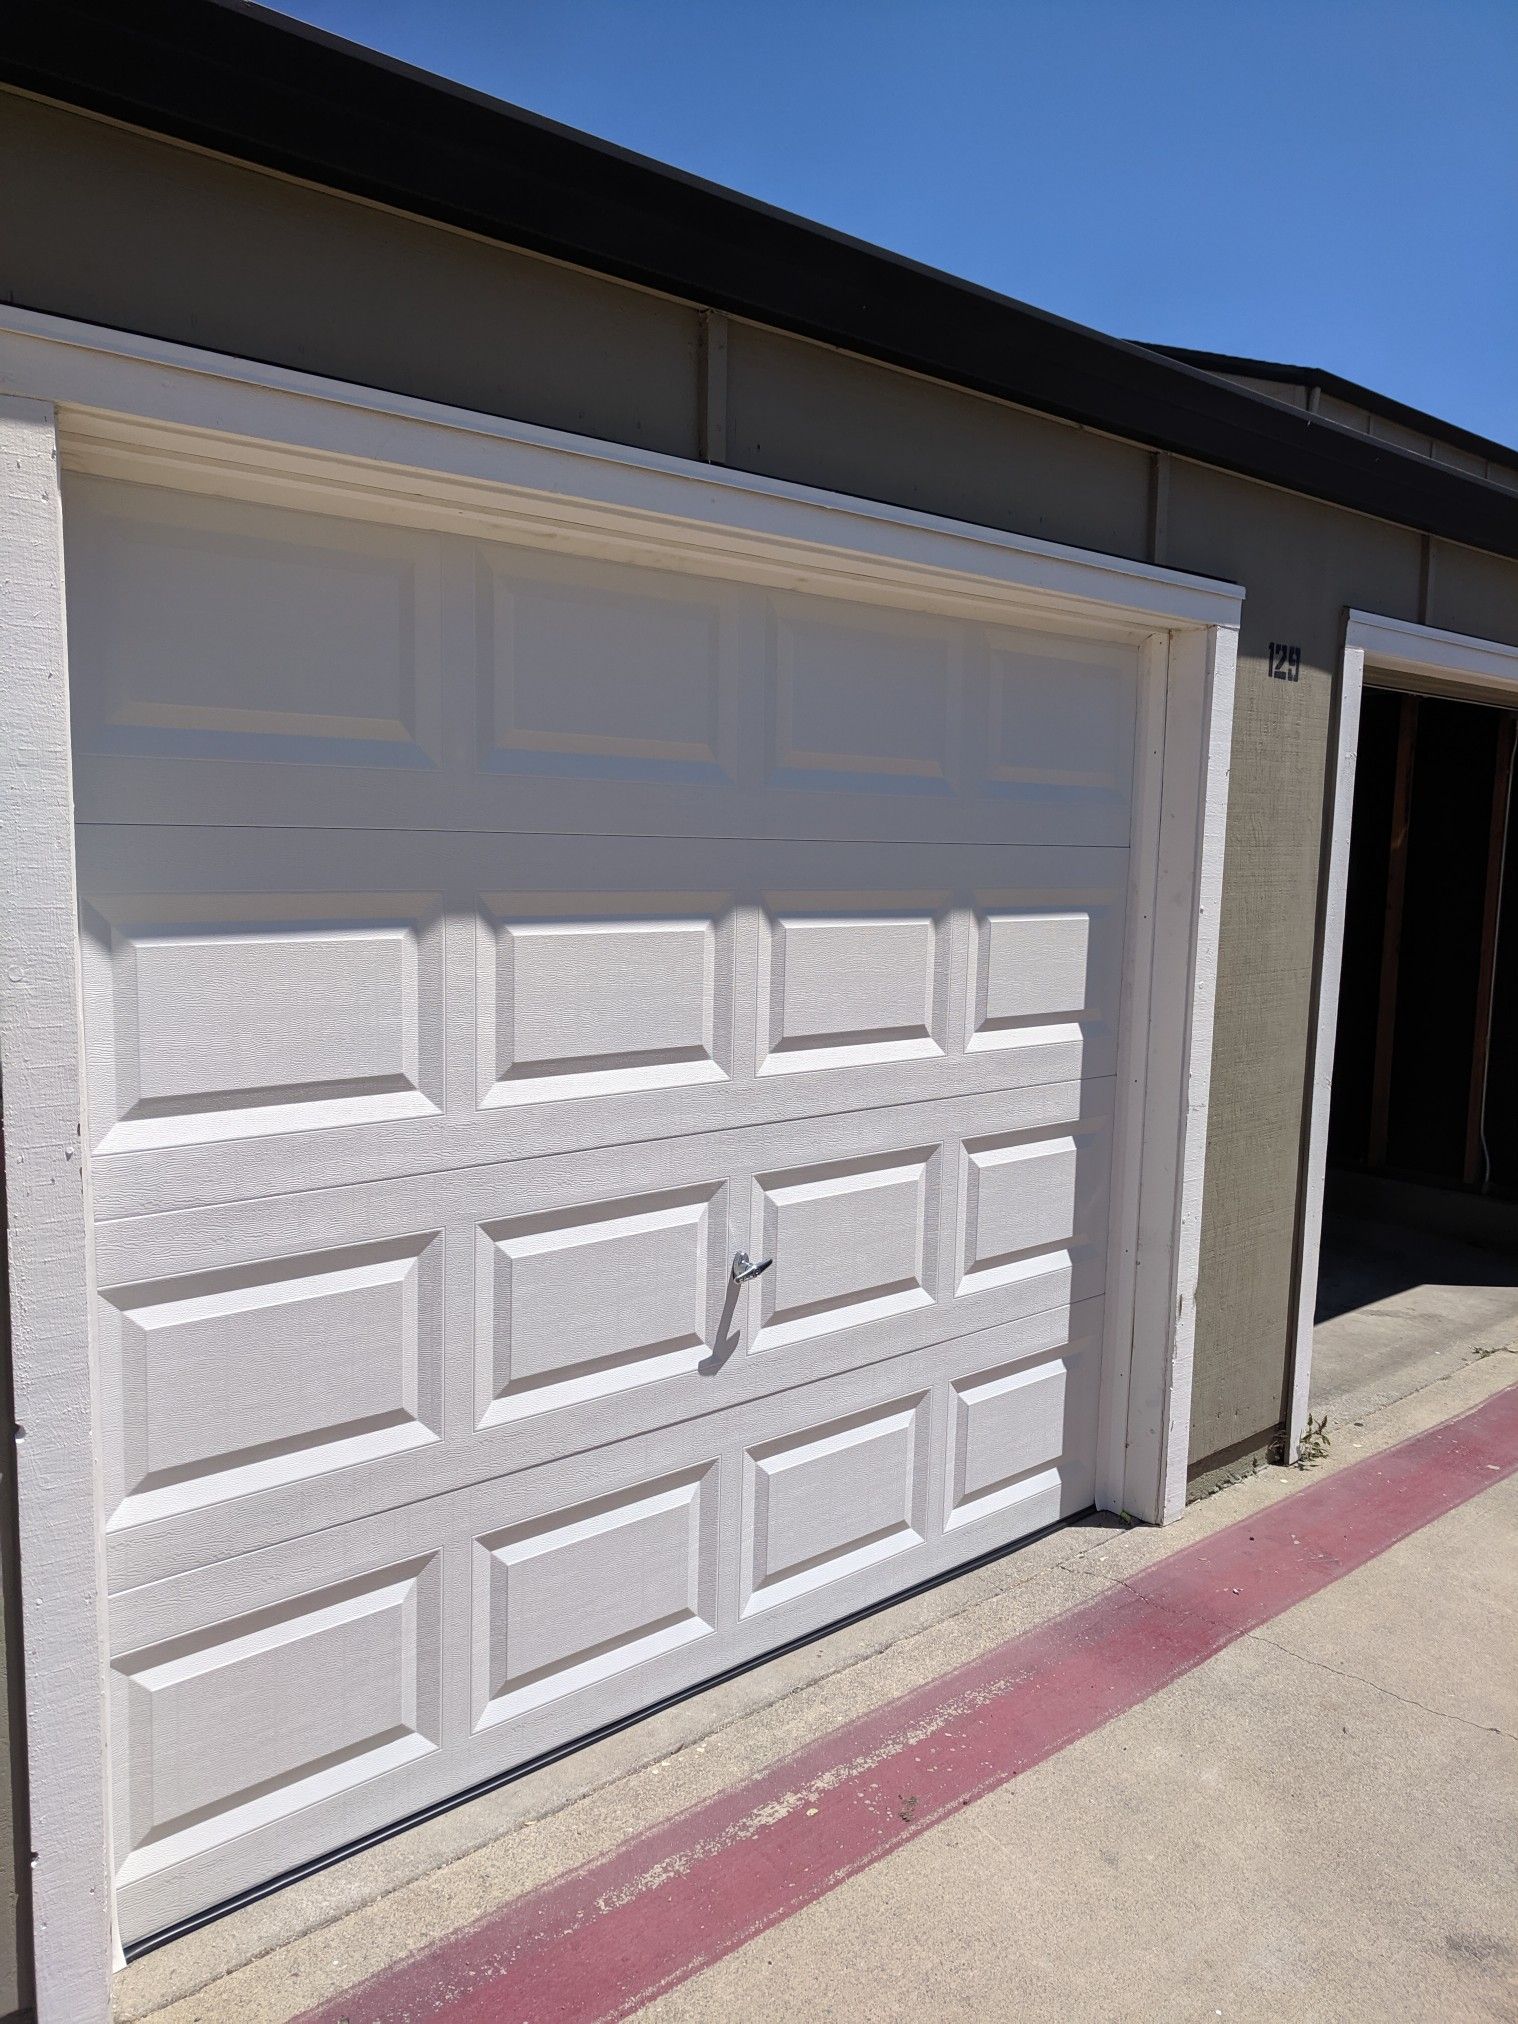 8x7 4 garage door panels only- Color May Not Be White 